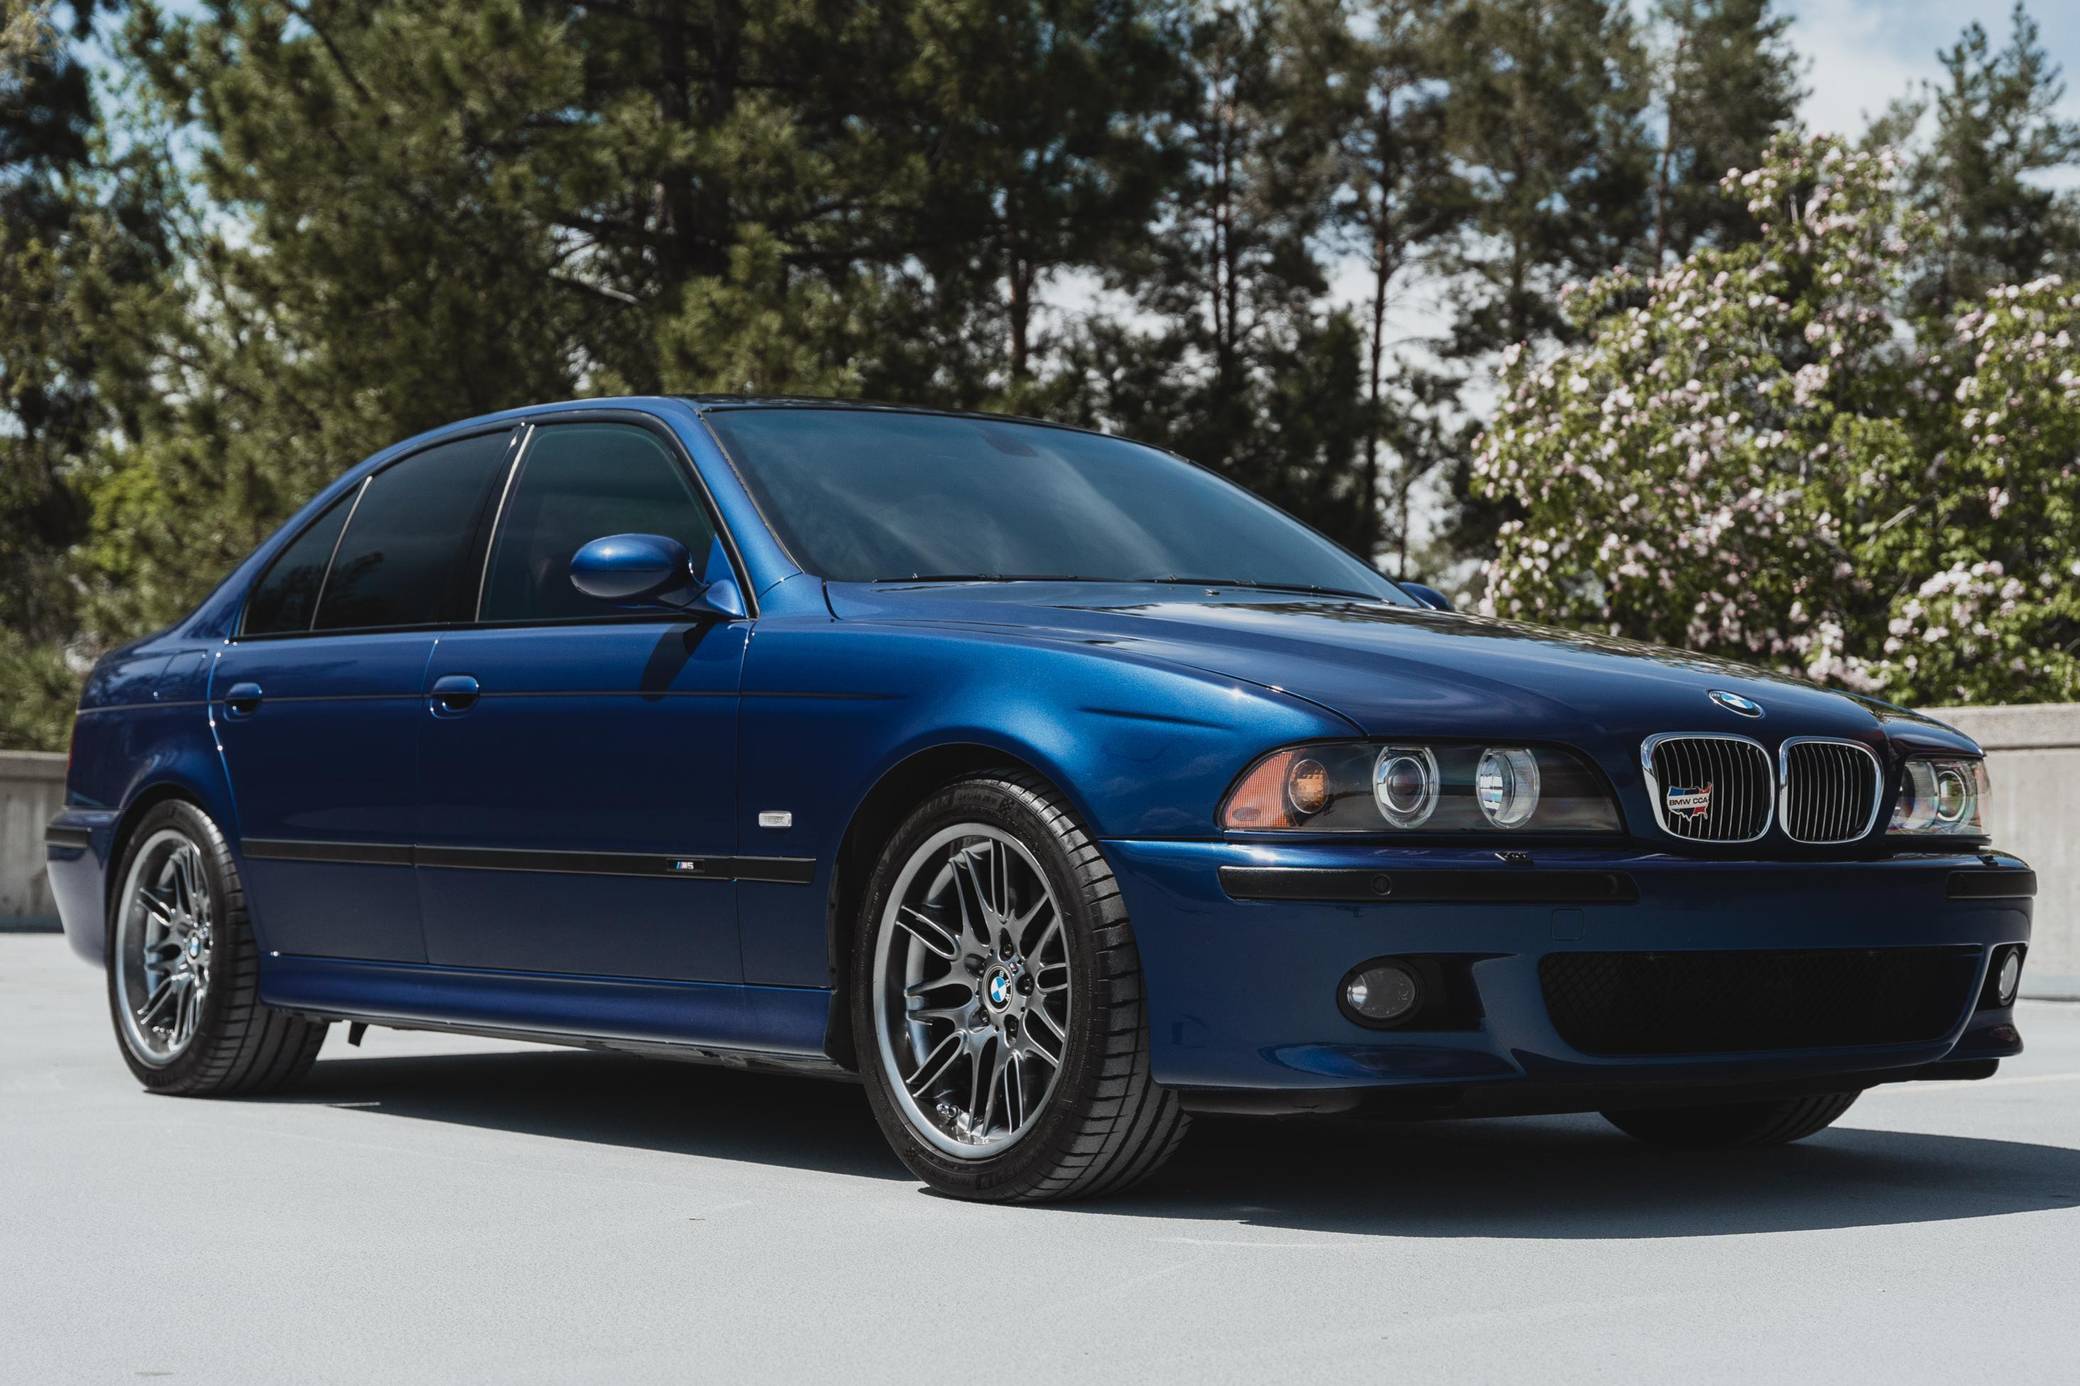 BMW SERIE 5 2002-e39-bmw-m5-rare-lots-of-recent-work-rising